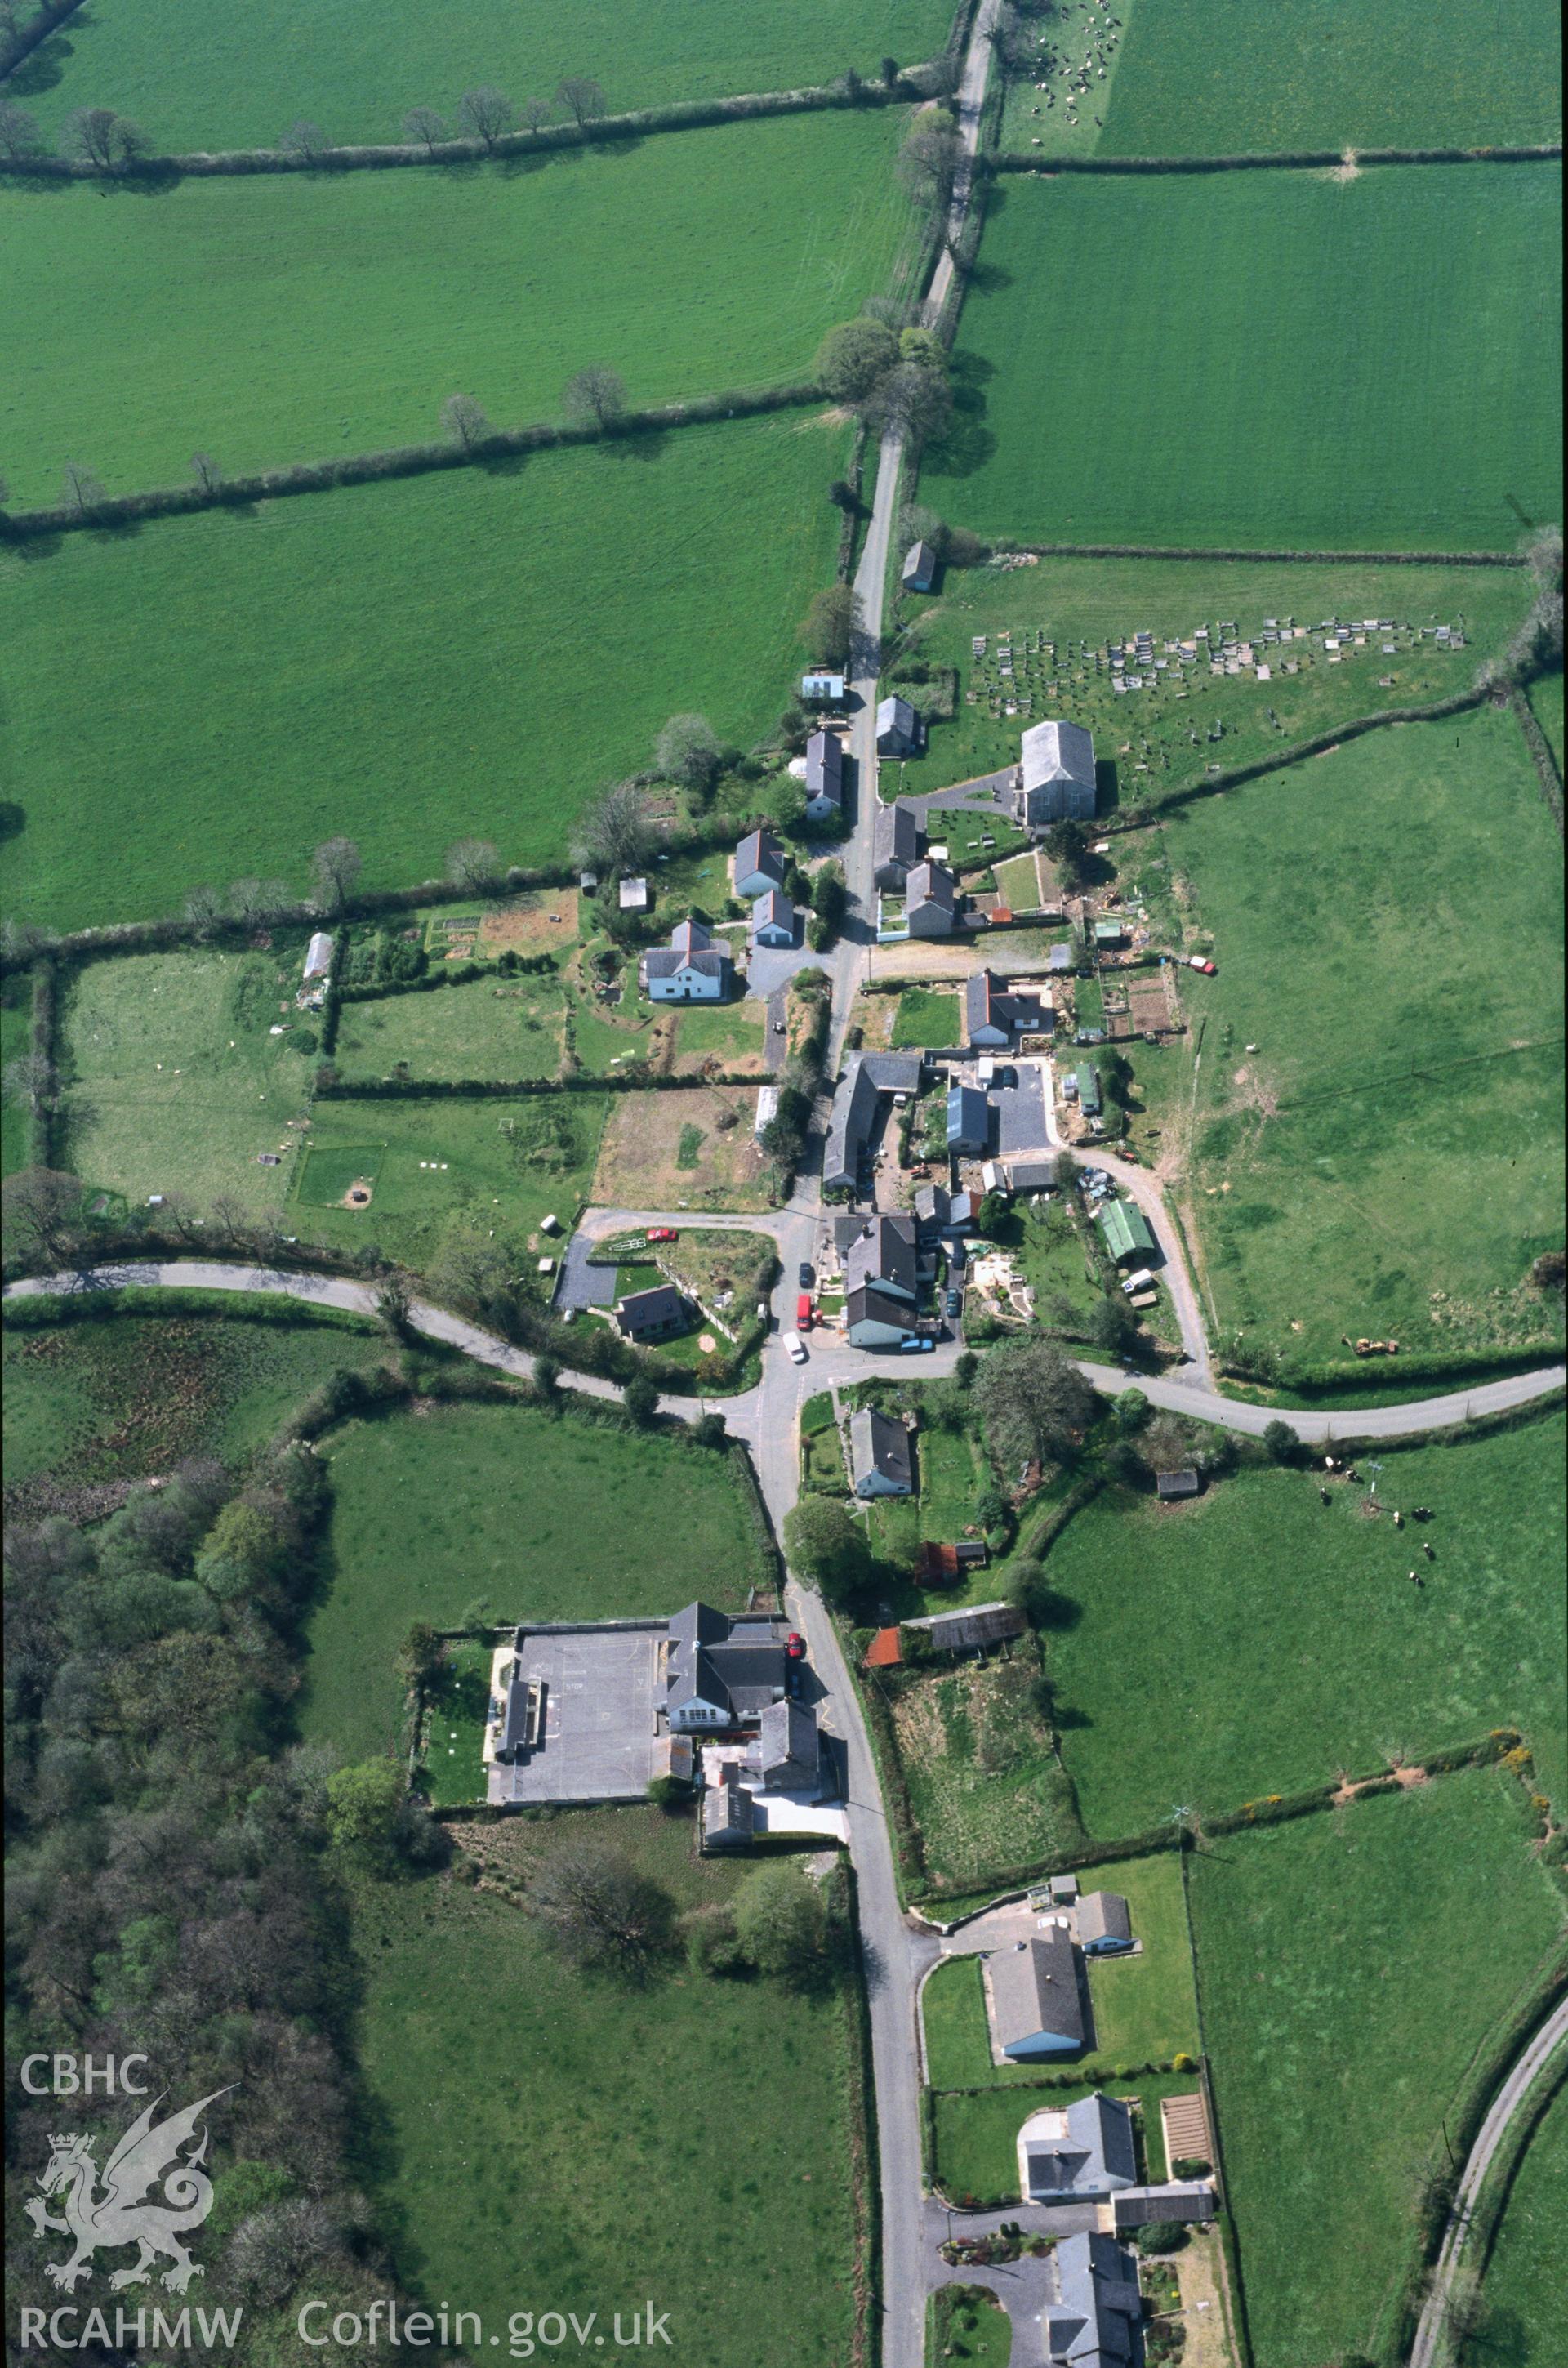 Slide of RCAHMW colour oblique aerial photograph of Glandwr, taken by T.G. Driver, 2/5/2000.